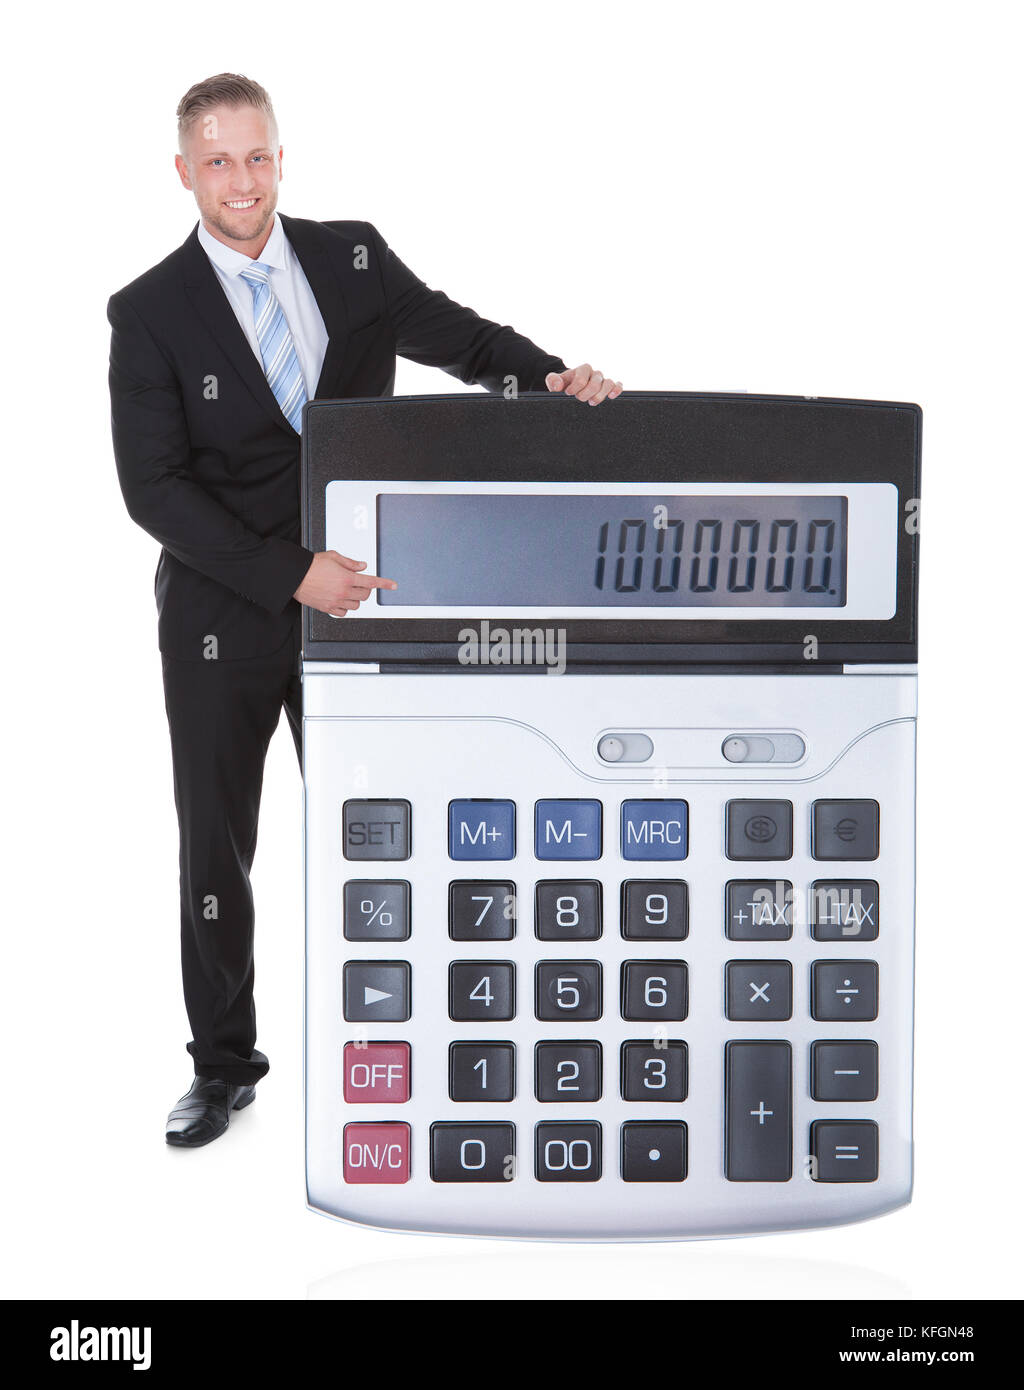 Smiling attractive businessman in a suit displaying a an oversized calculator with the keypad towards the camera  conceptual financial image isolated  Stock Photo